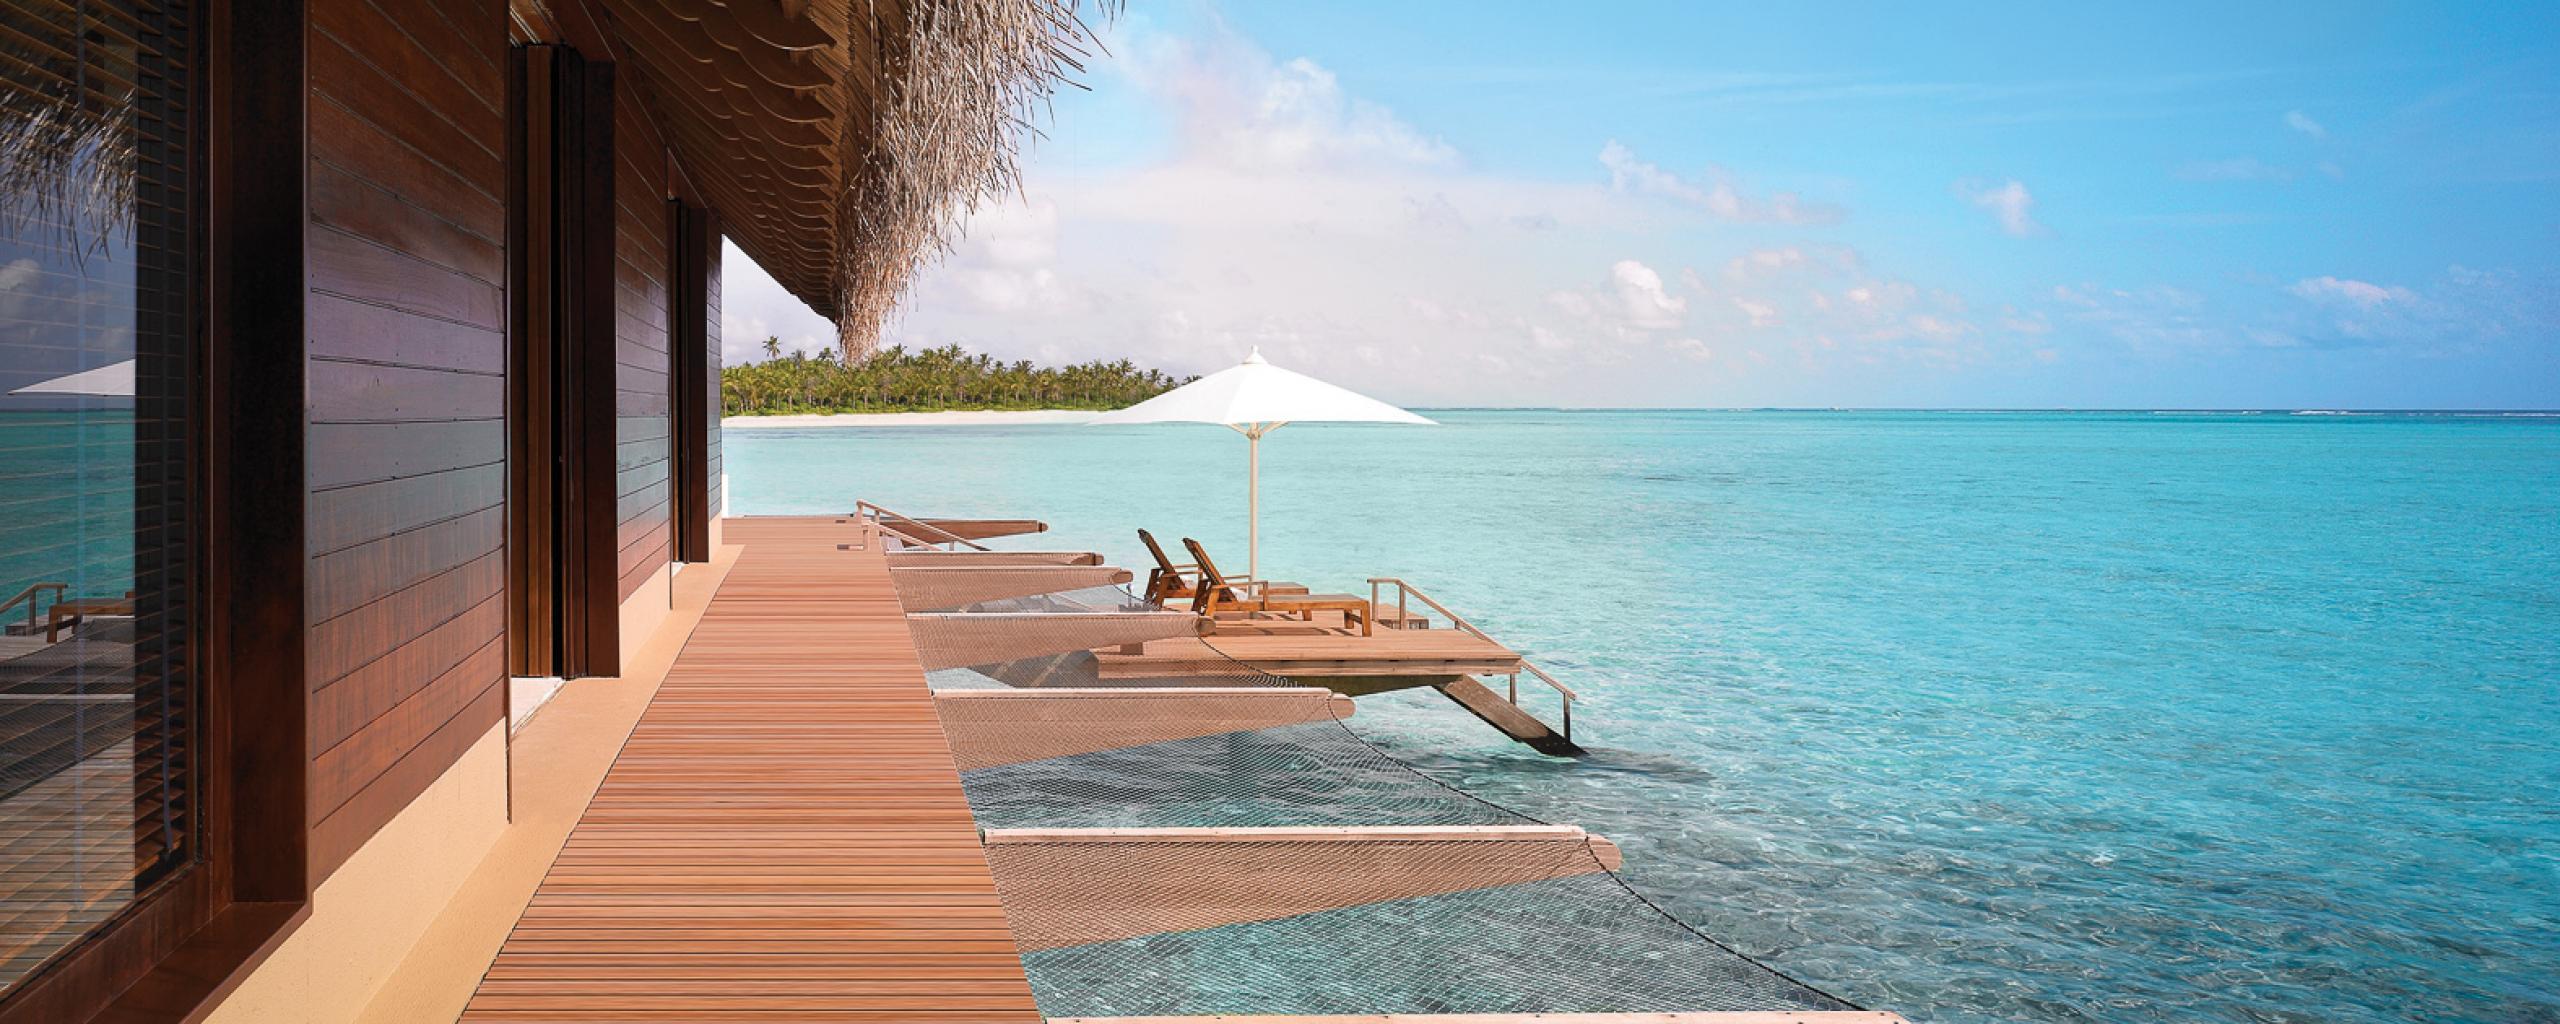 One & Only Reethi Rah - North Male Atoll